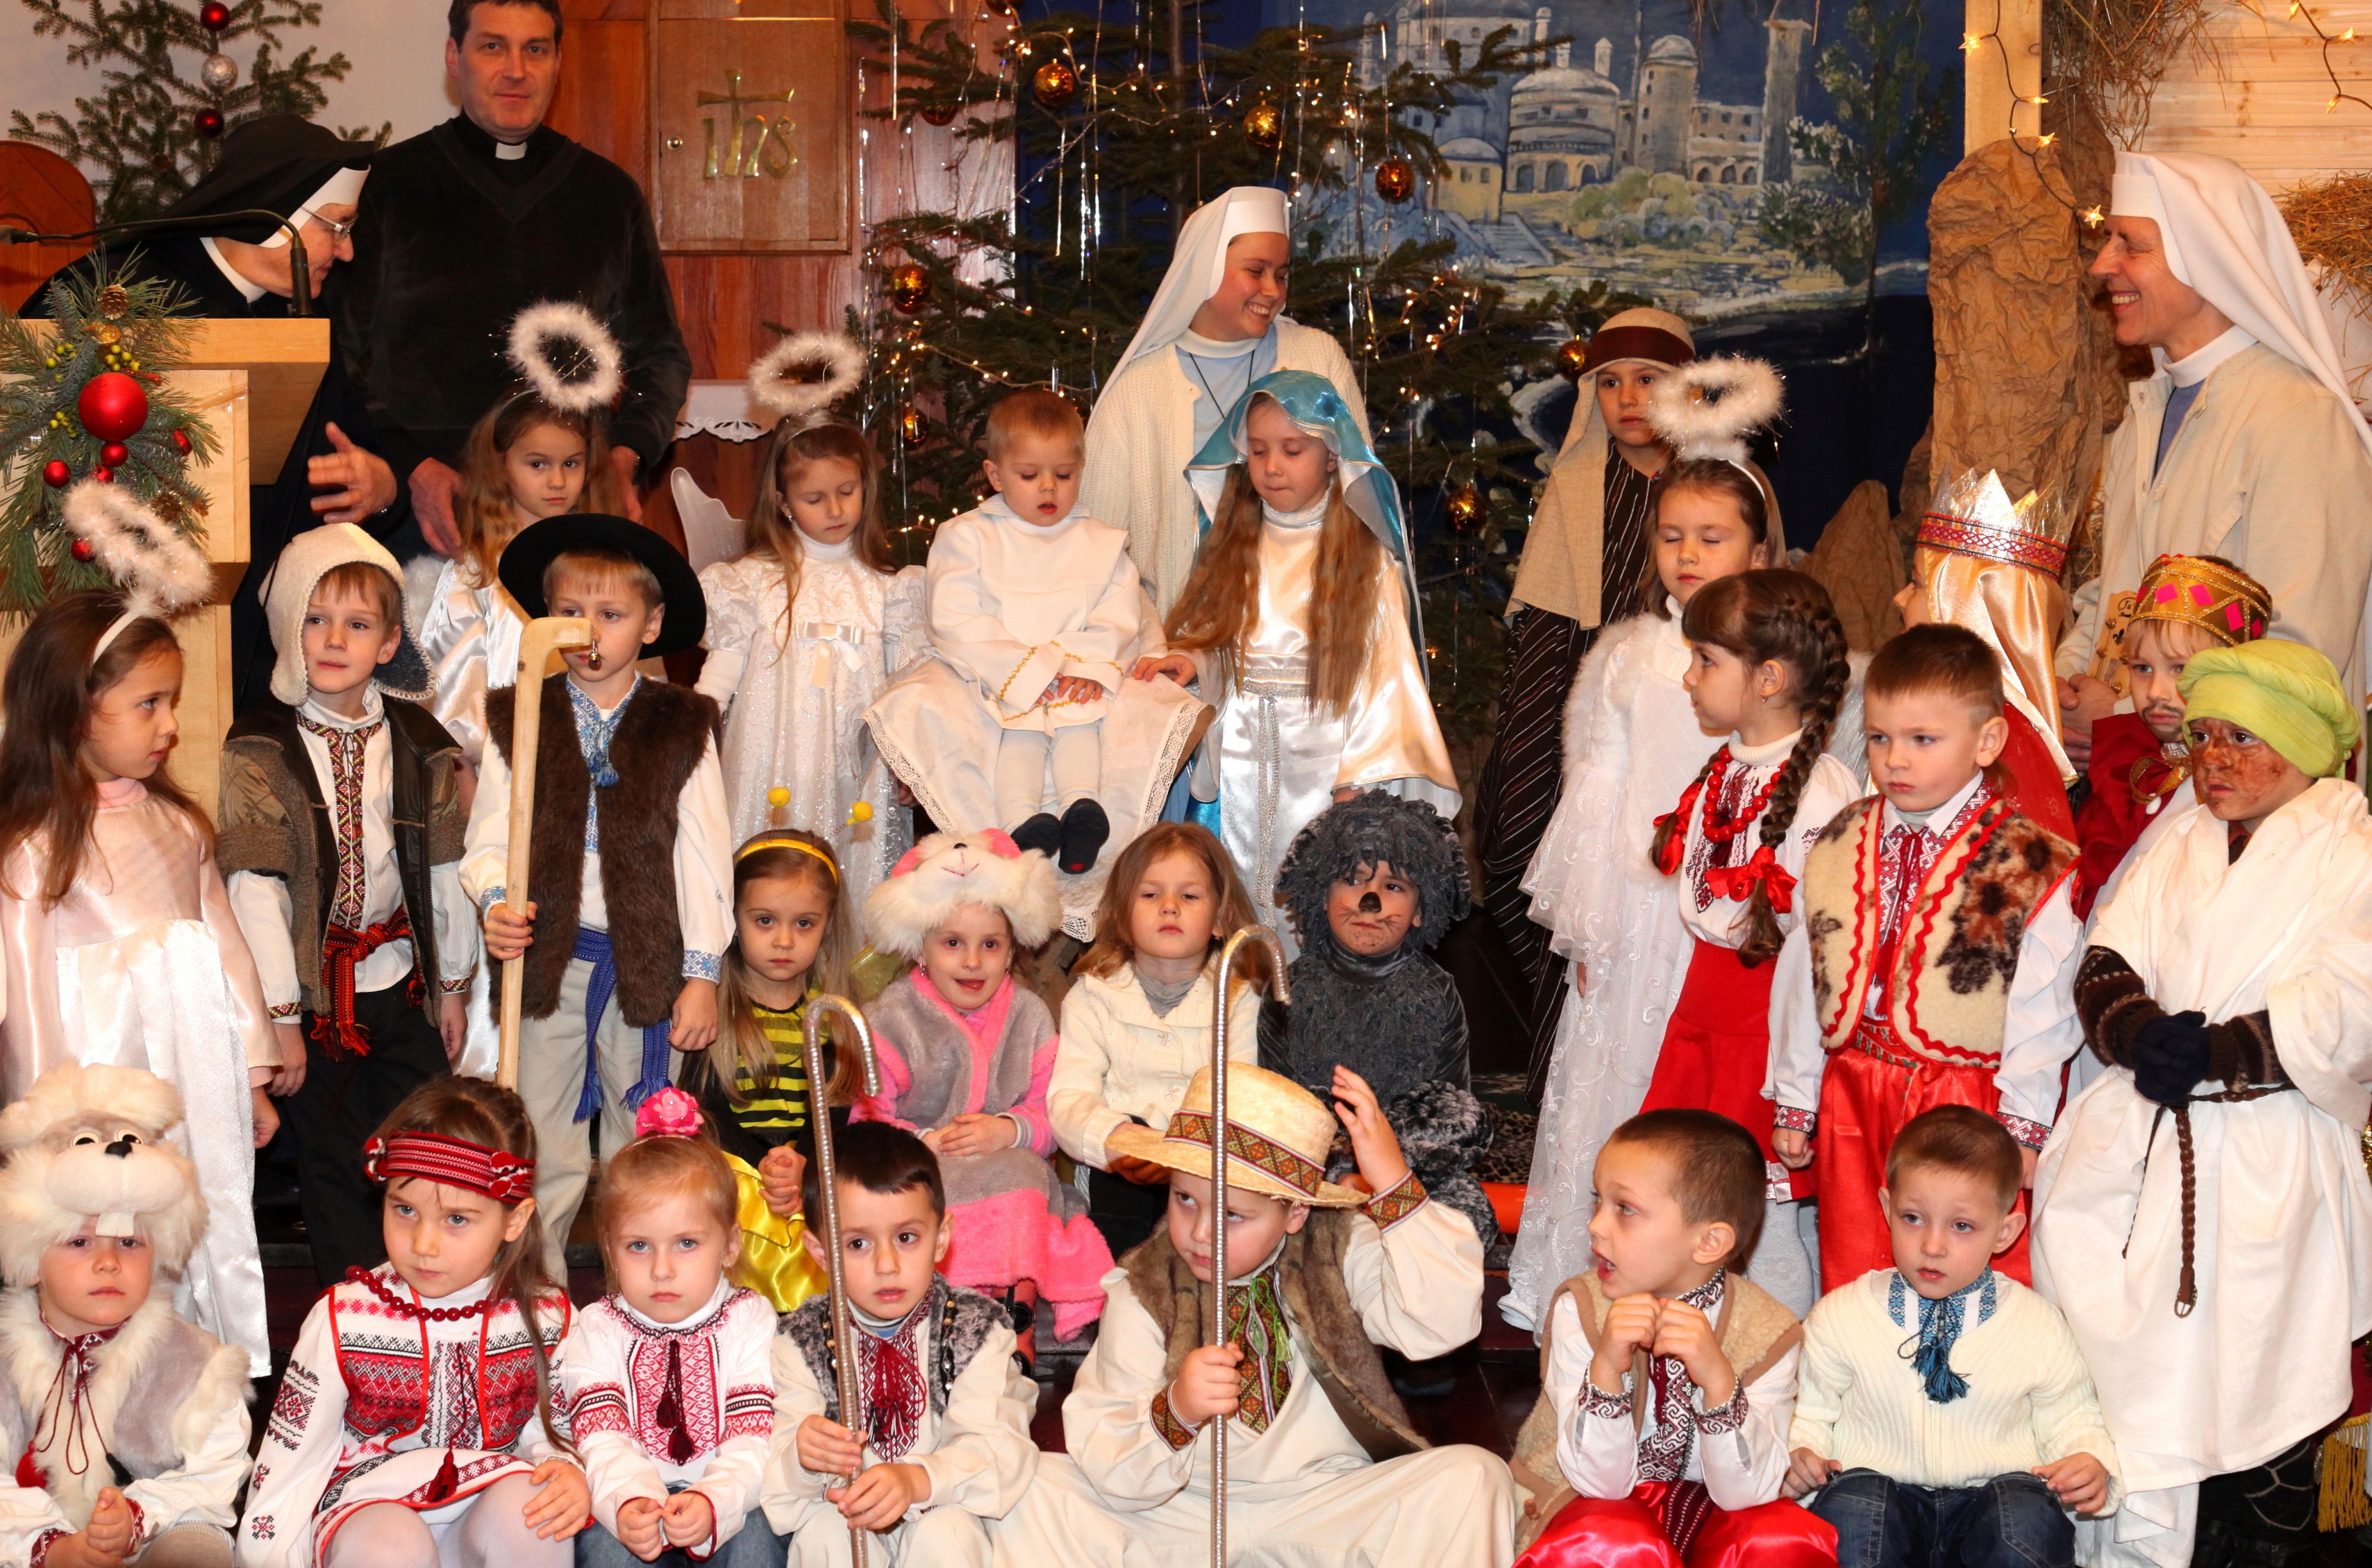 participants of the Nativity performance in a Catholic kindergarten